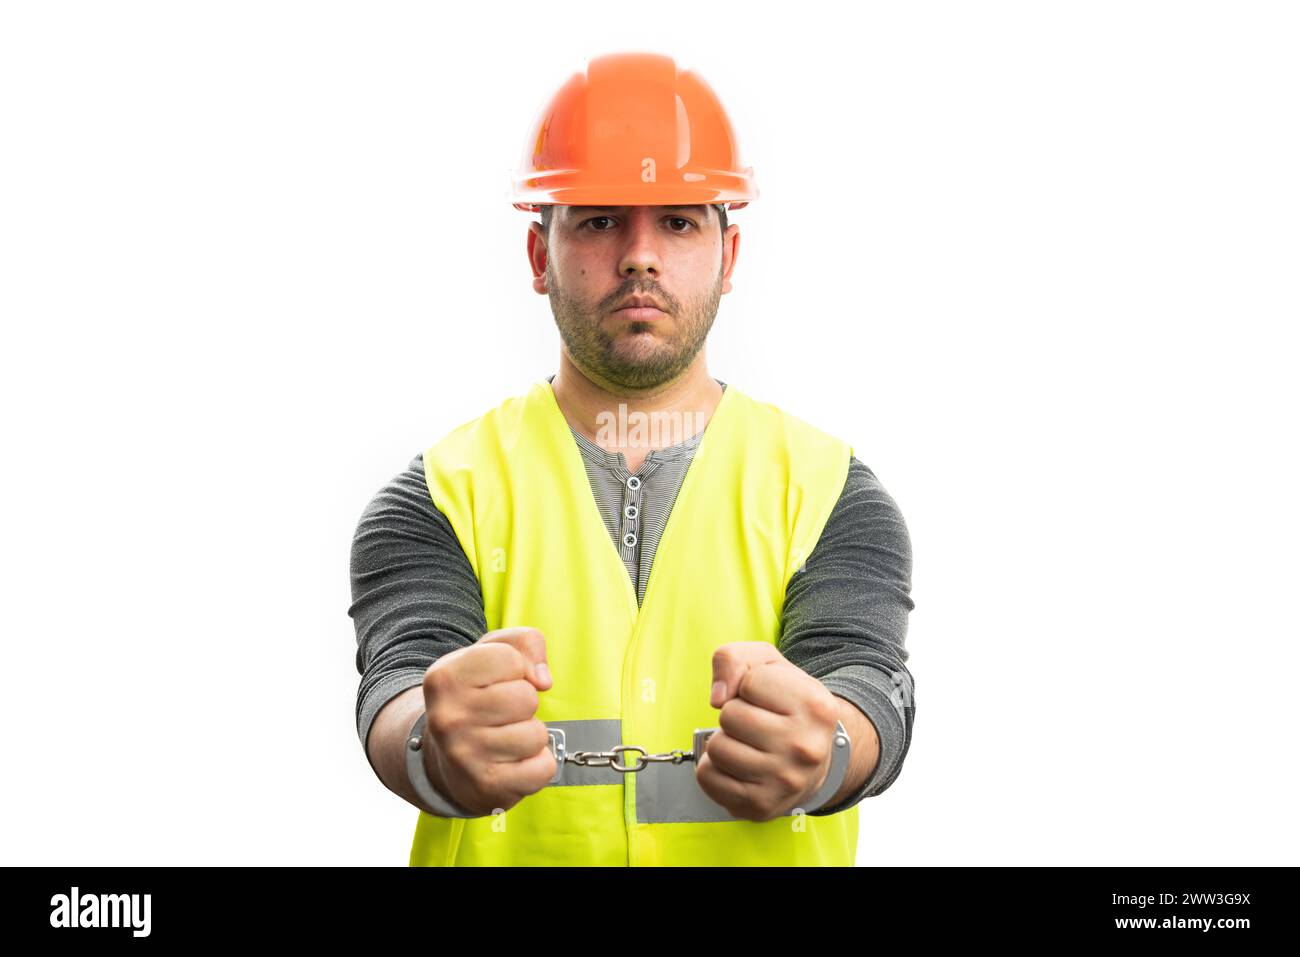 Corrupted adult male constructor in handcuffs wearing safety hardhat and fluorescent vest as work attire isolated on white studio background Stock Photo